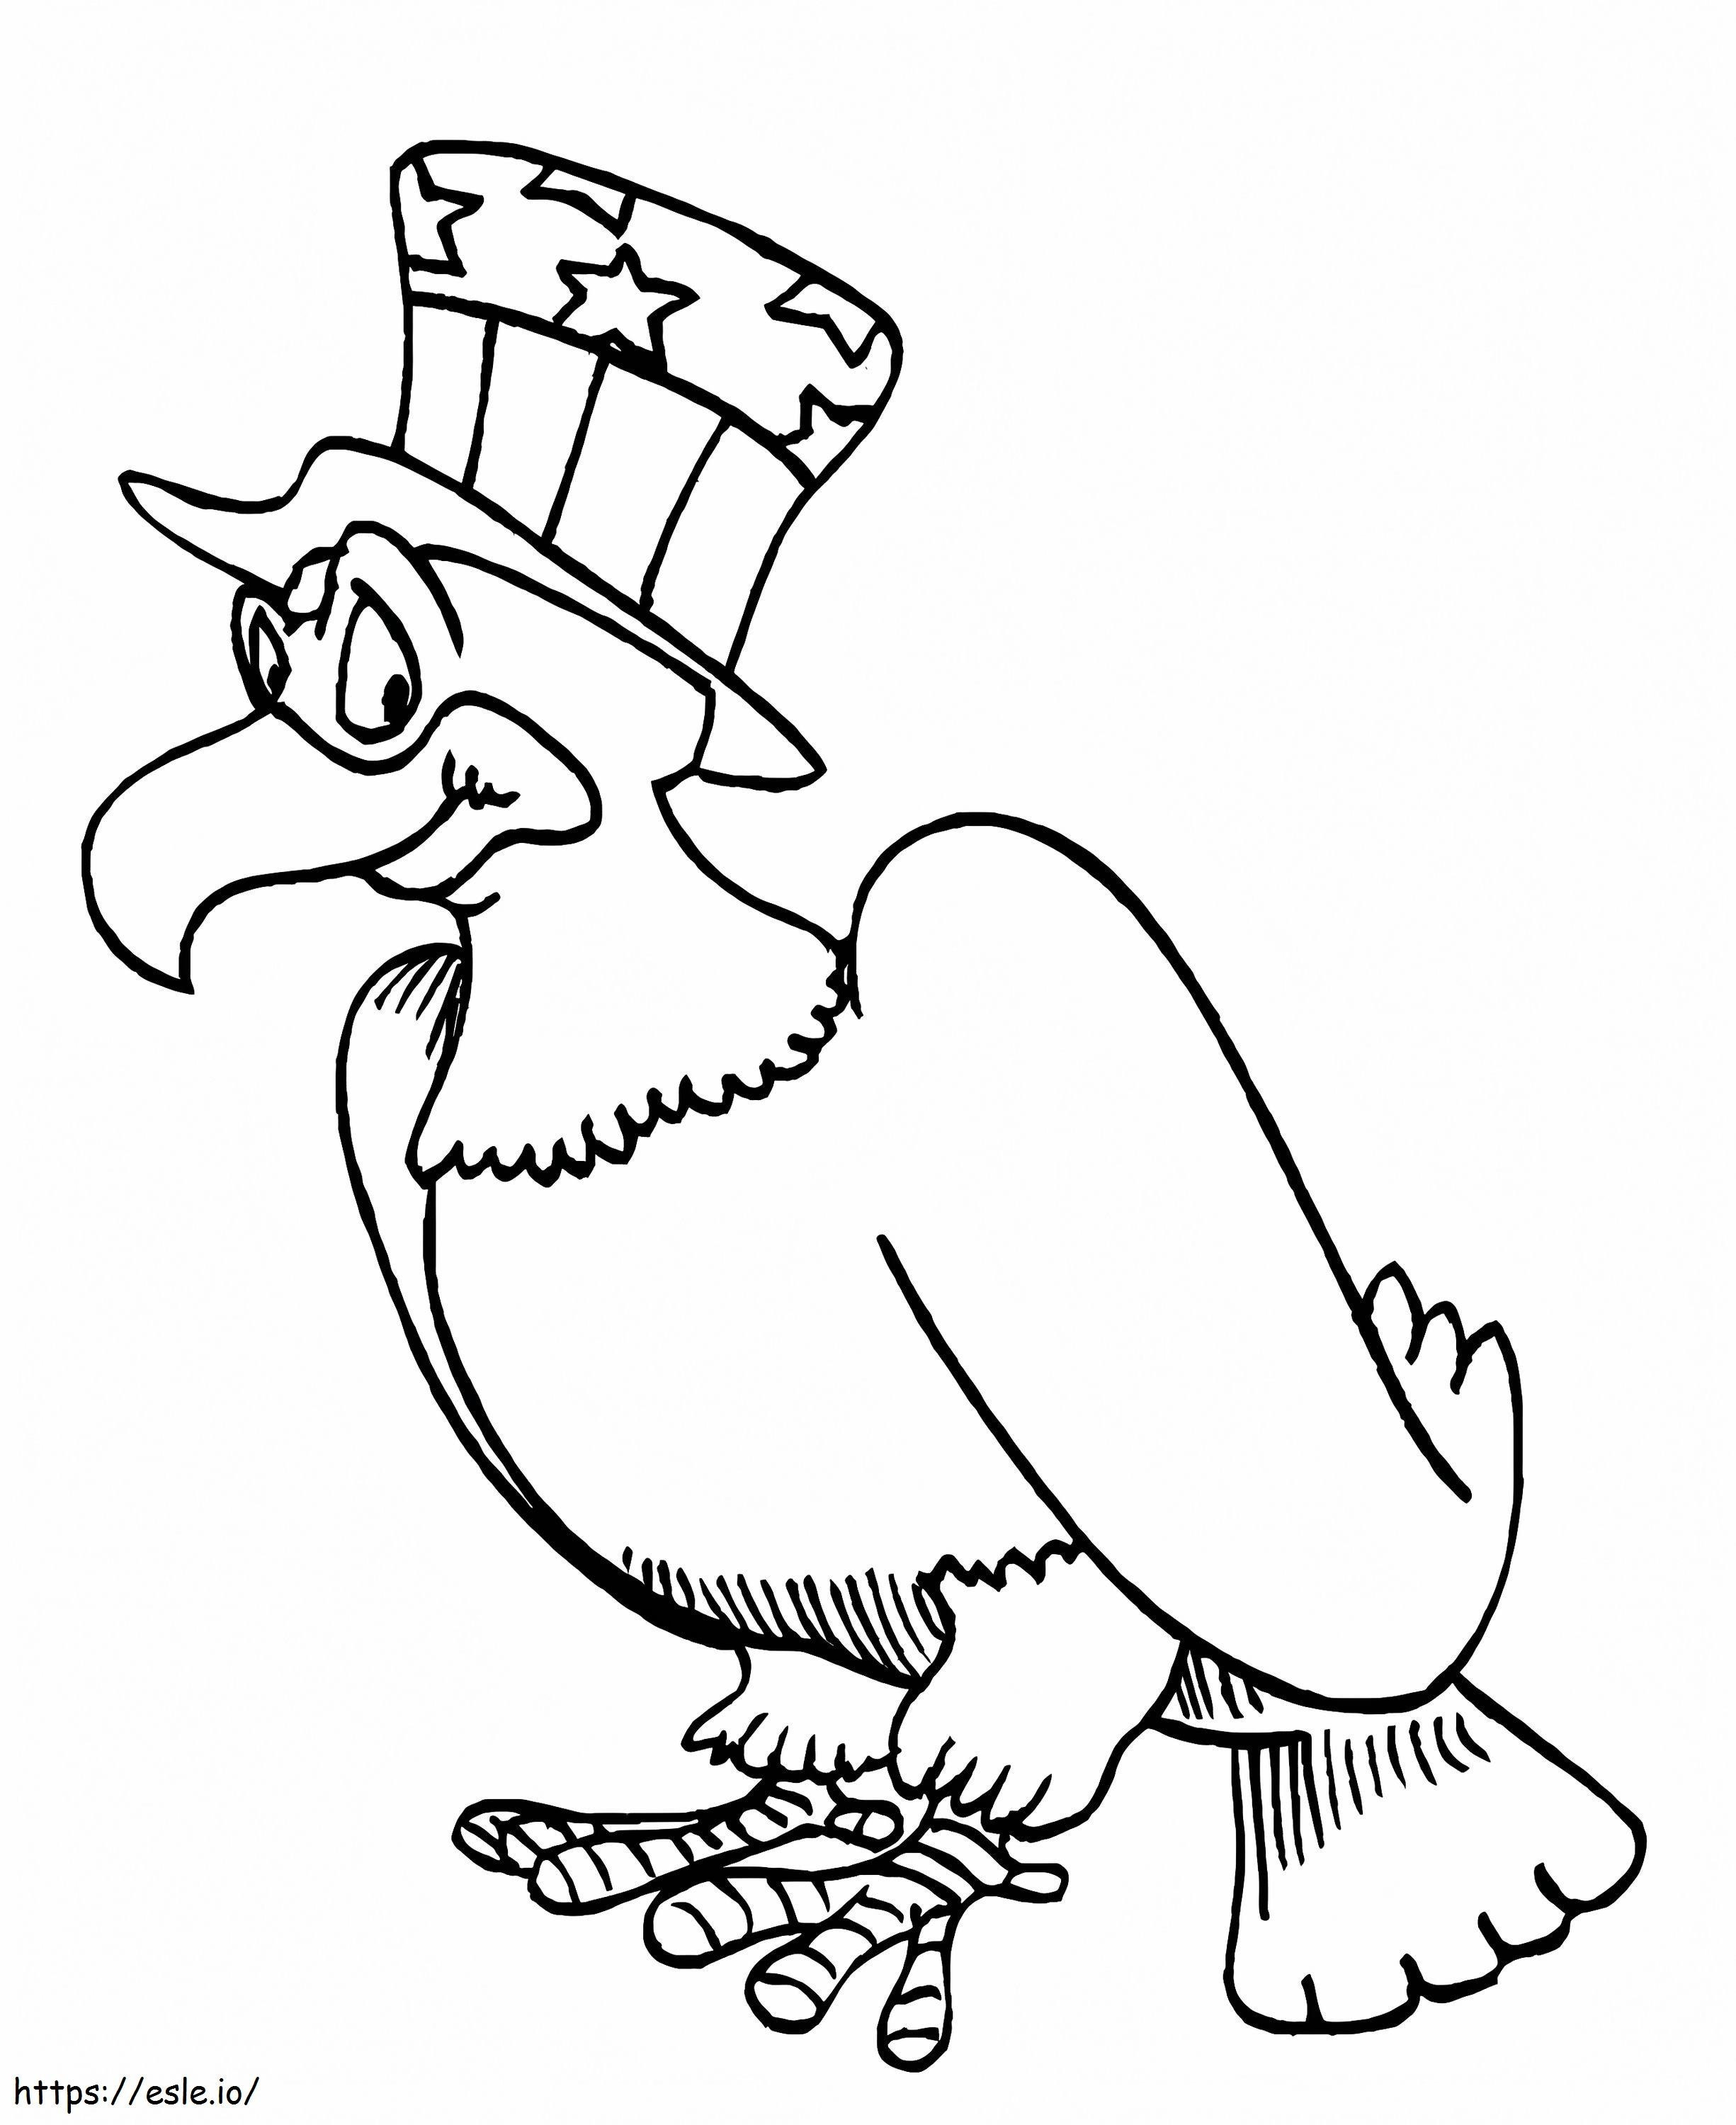 Happy Eagle Coloring Page coloring page